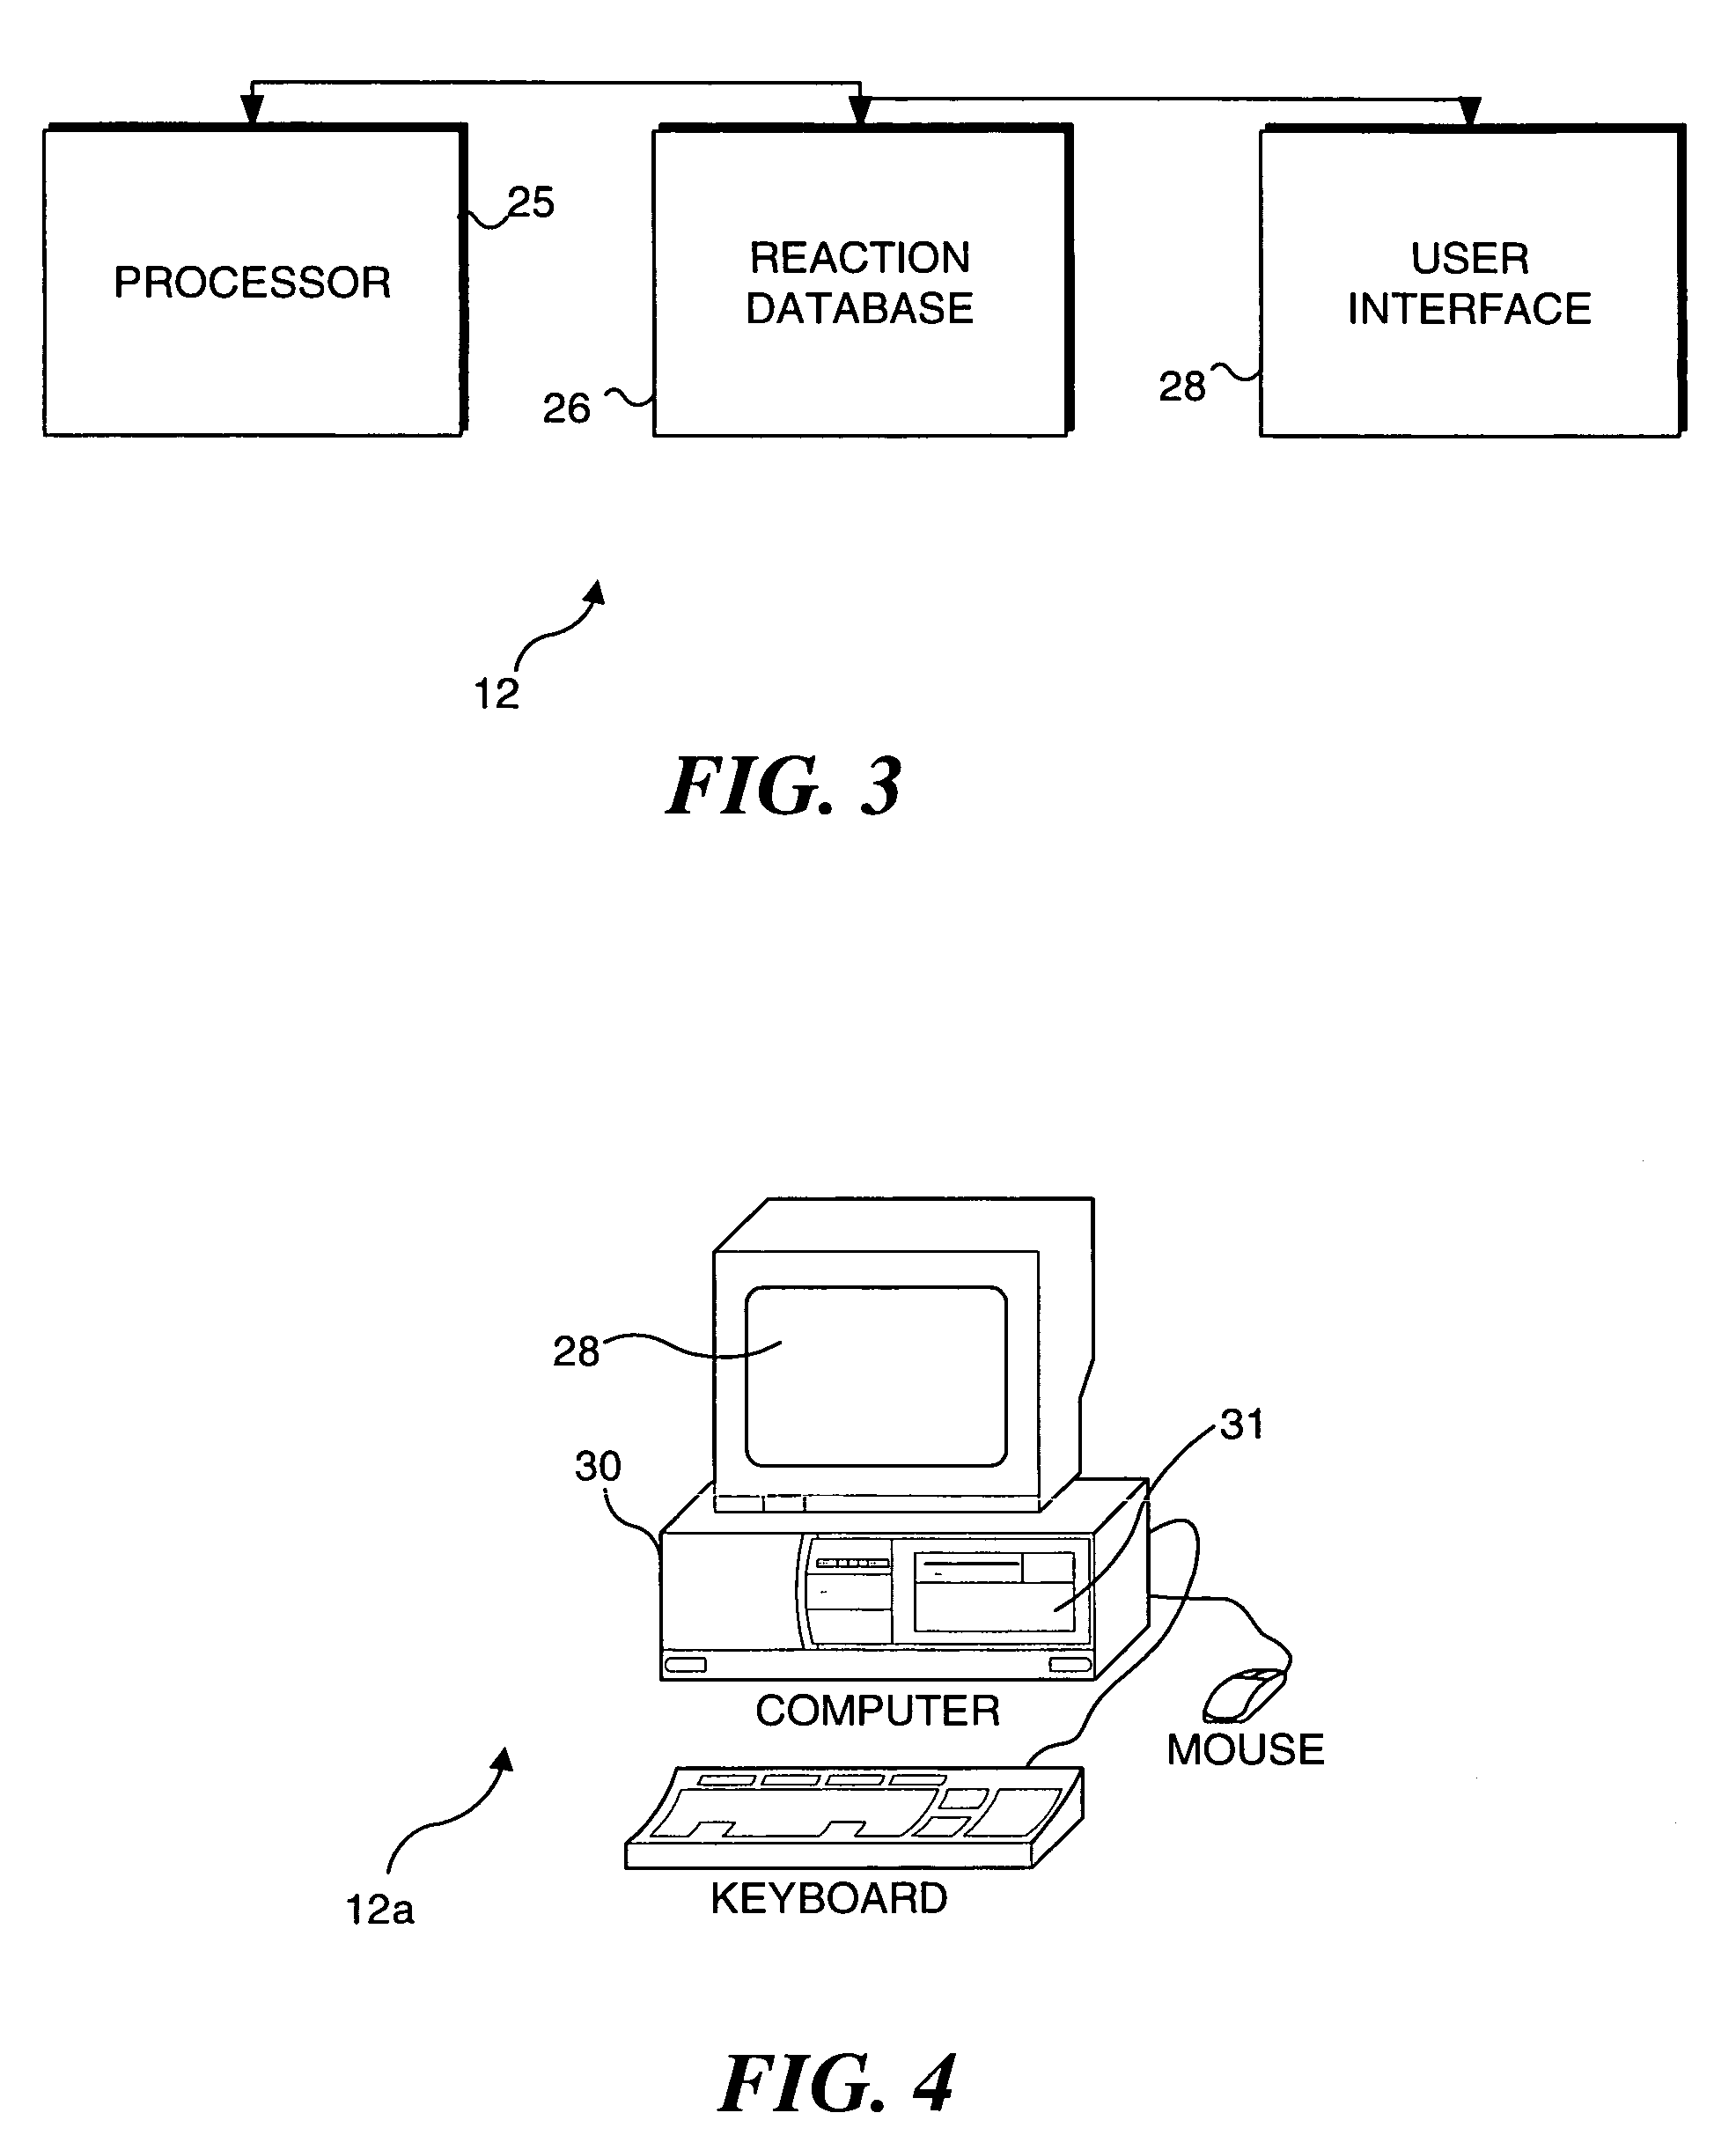 Modular chemical production system incorporating a microreactor